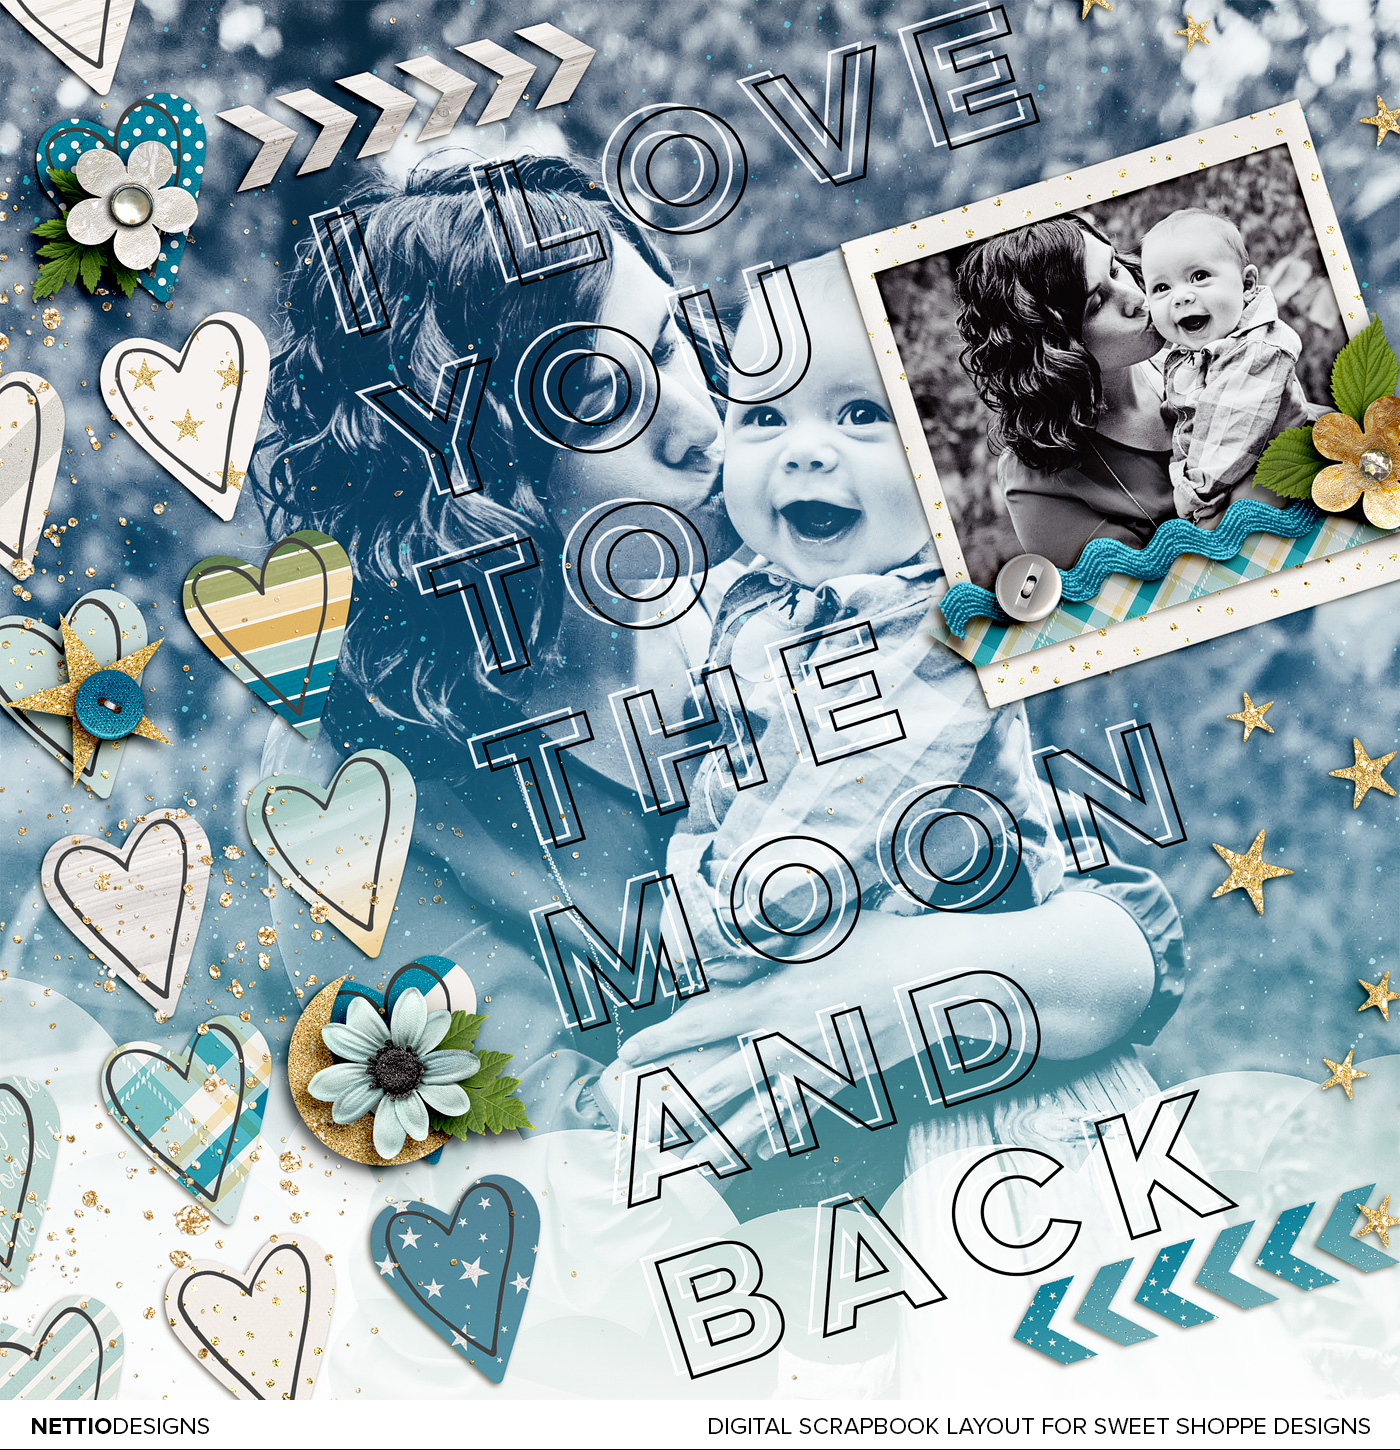 Digital Scrapbook Layout by Lynnette Penacho for Scrapbook Saturday - How I Use the History Snapshot Tool | NettioDesigns 